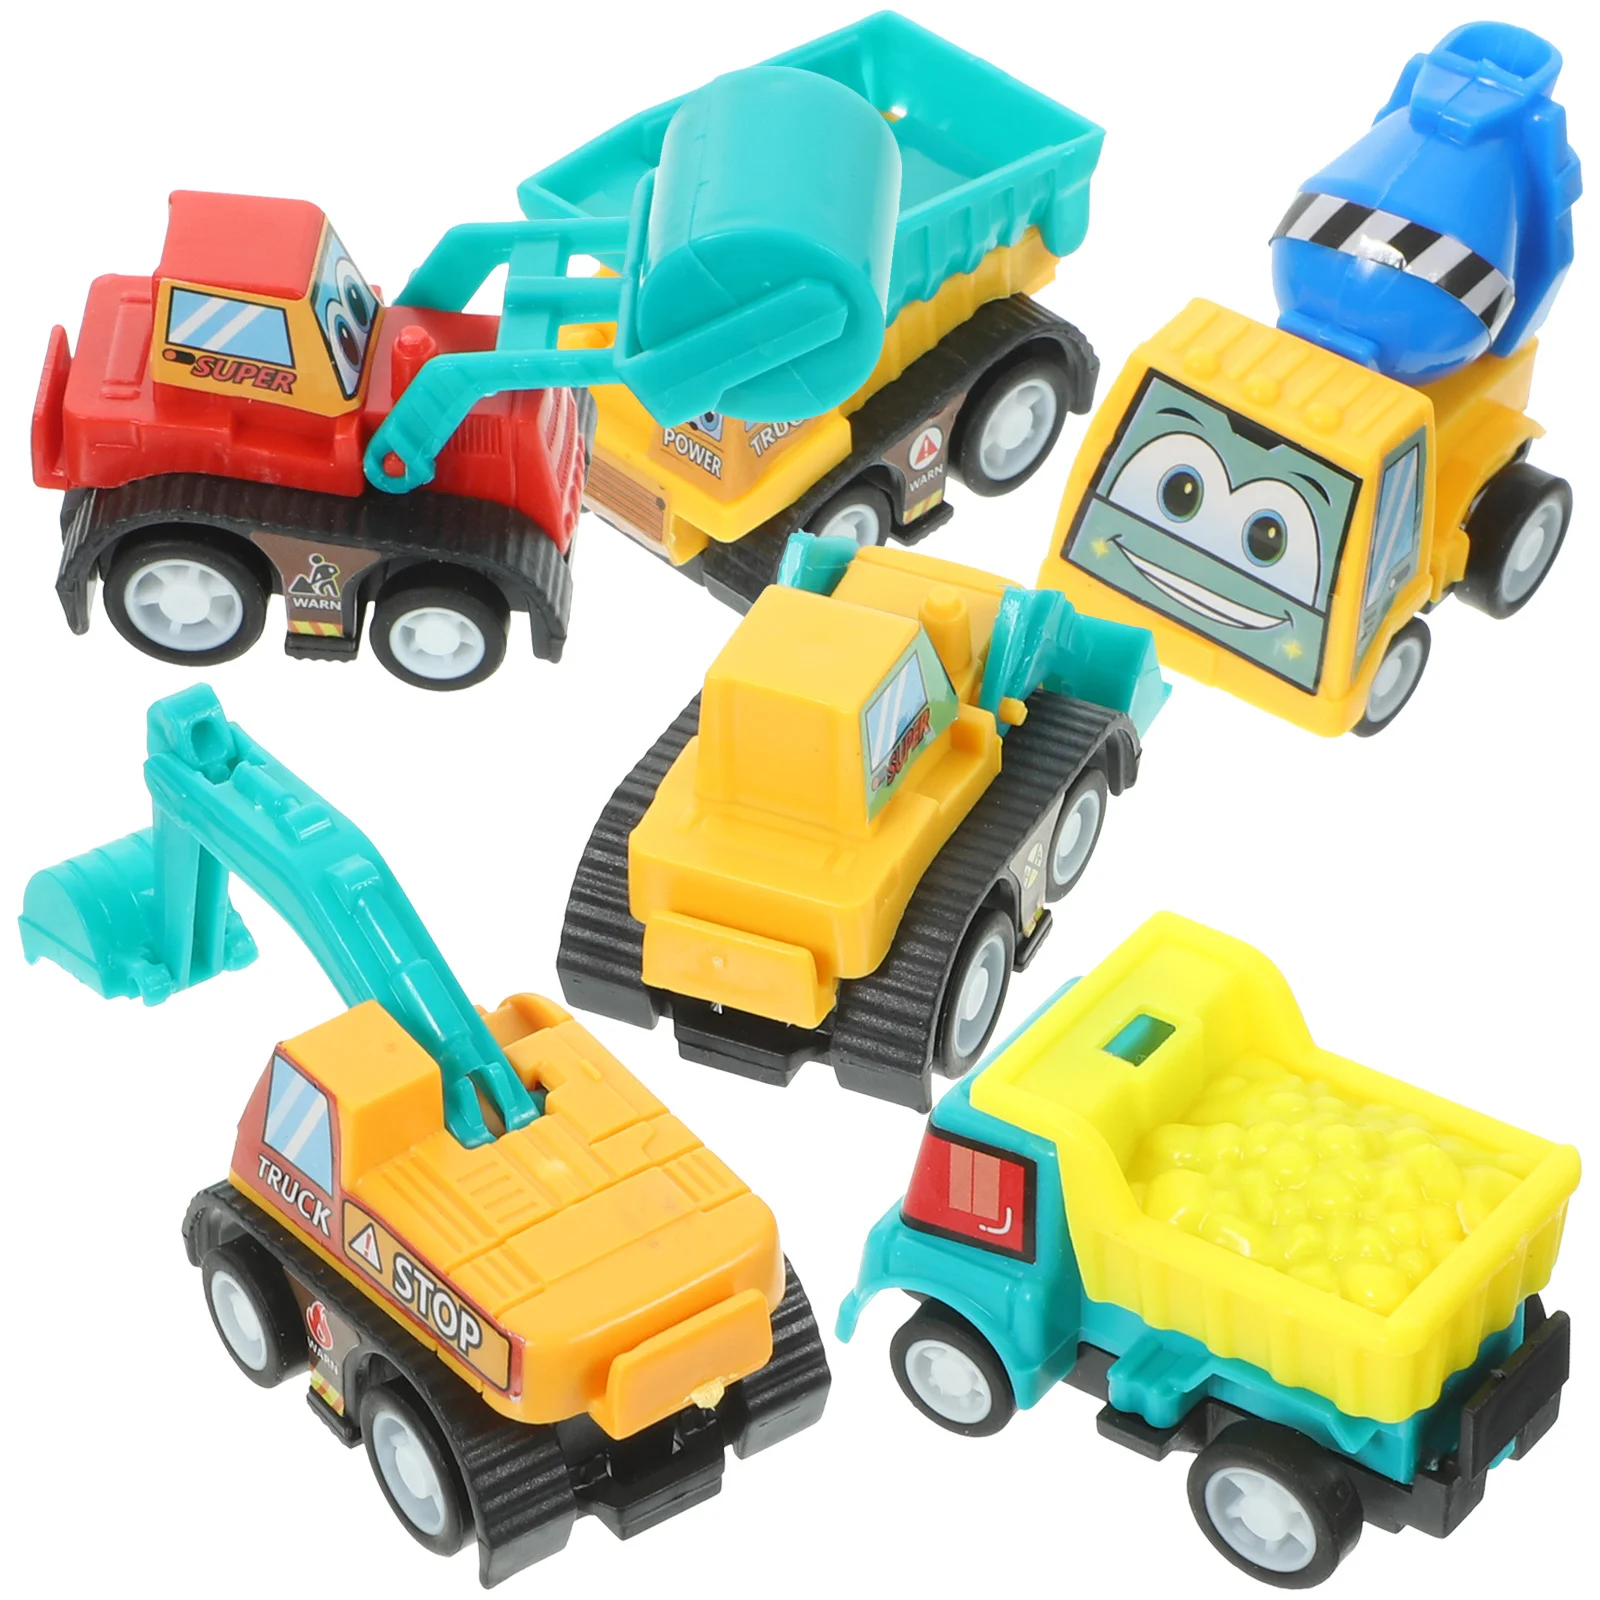 

6 Pcs Cartoon Baby Push Construction Toy Infant Kids Toys Toddler Inertial Small Vehicles Miniature Pull Back Cars Boy